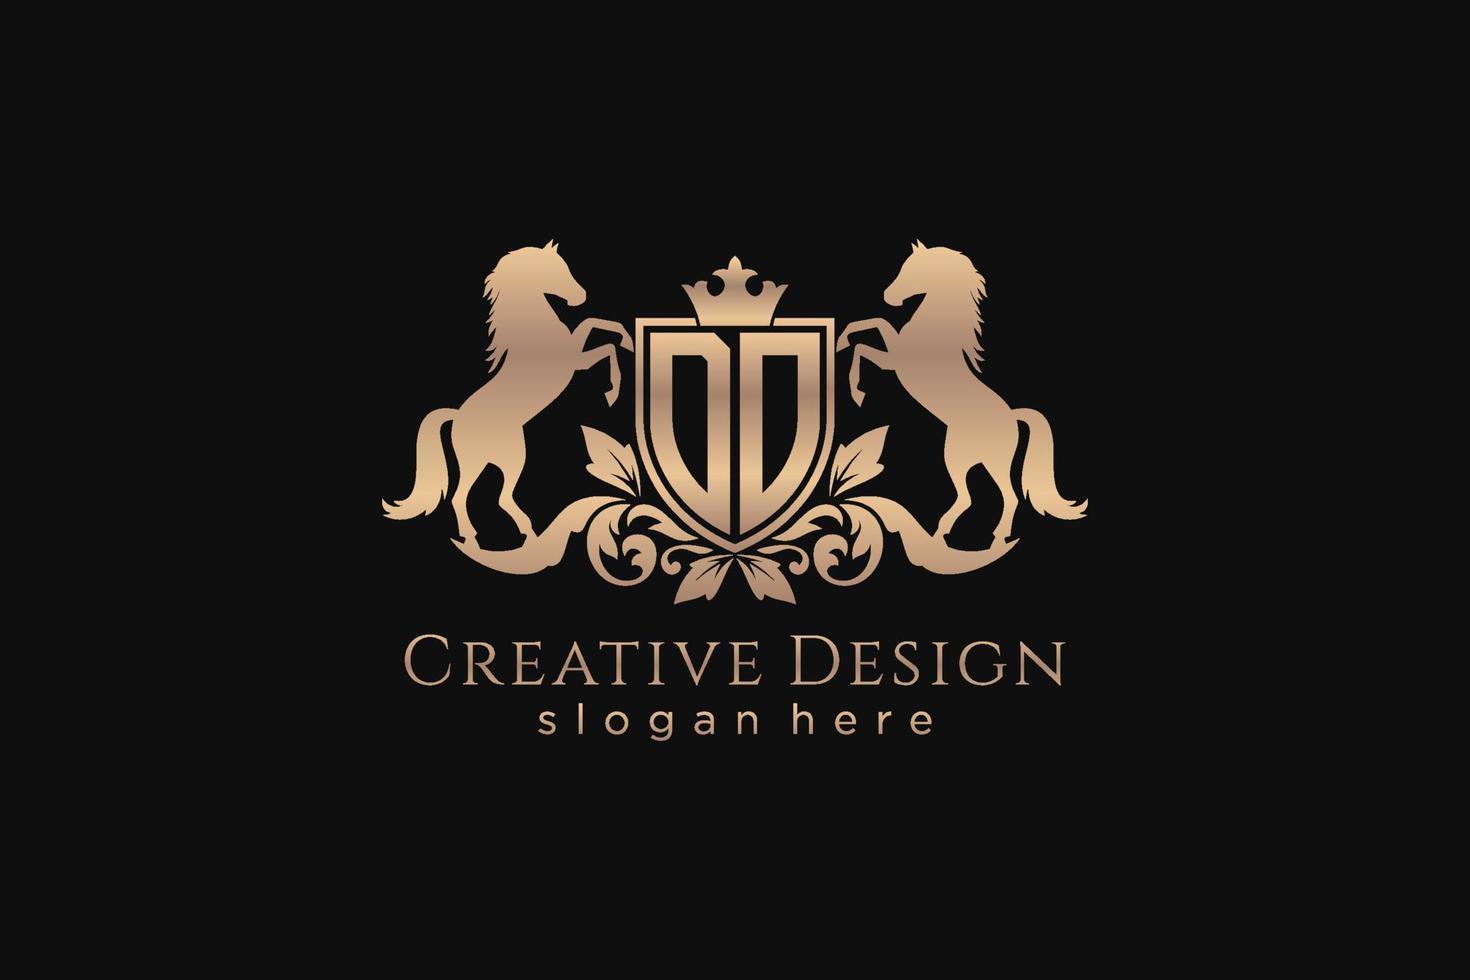 initial DO Retro golden crest with shield and two horses, badge template with scrolls and royal crown - perfect for luxurious branding projects vector